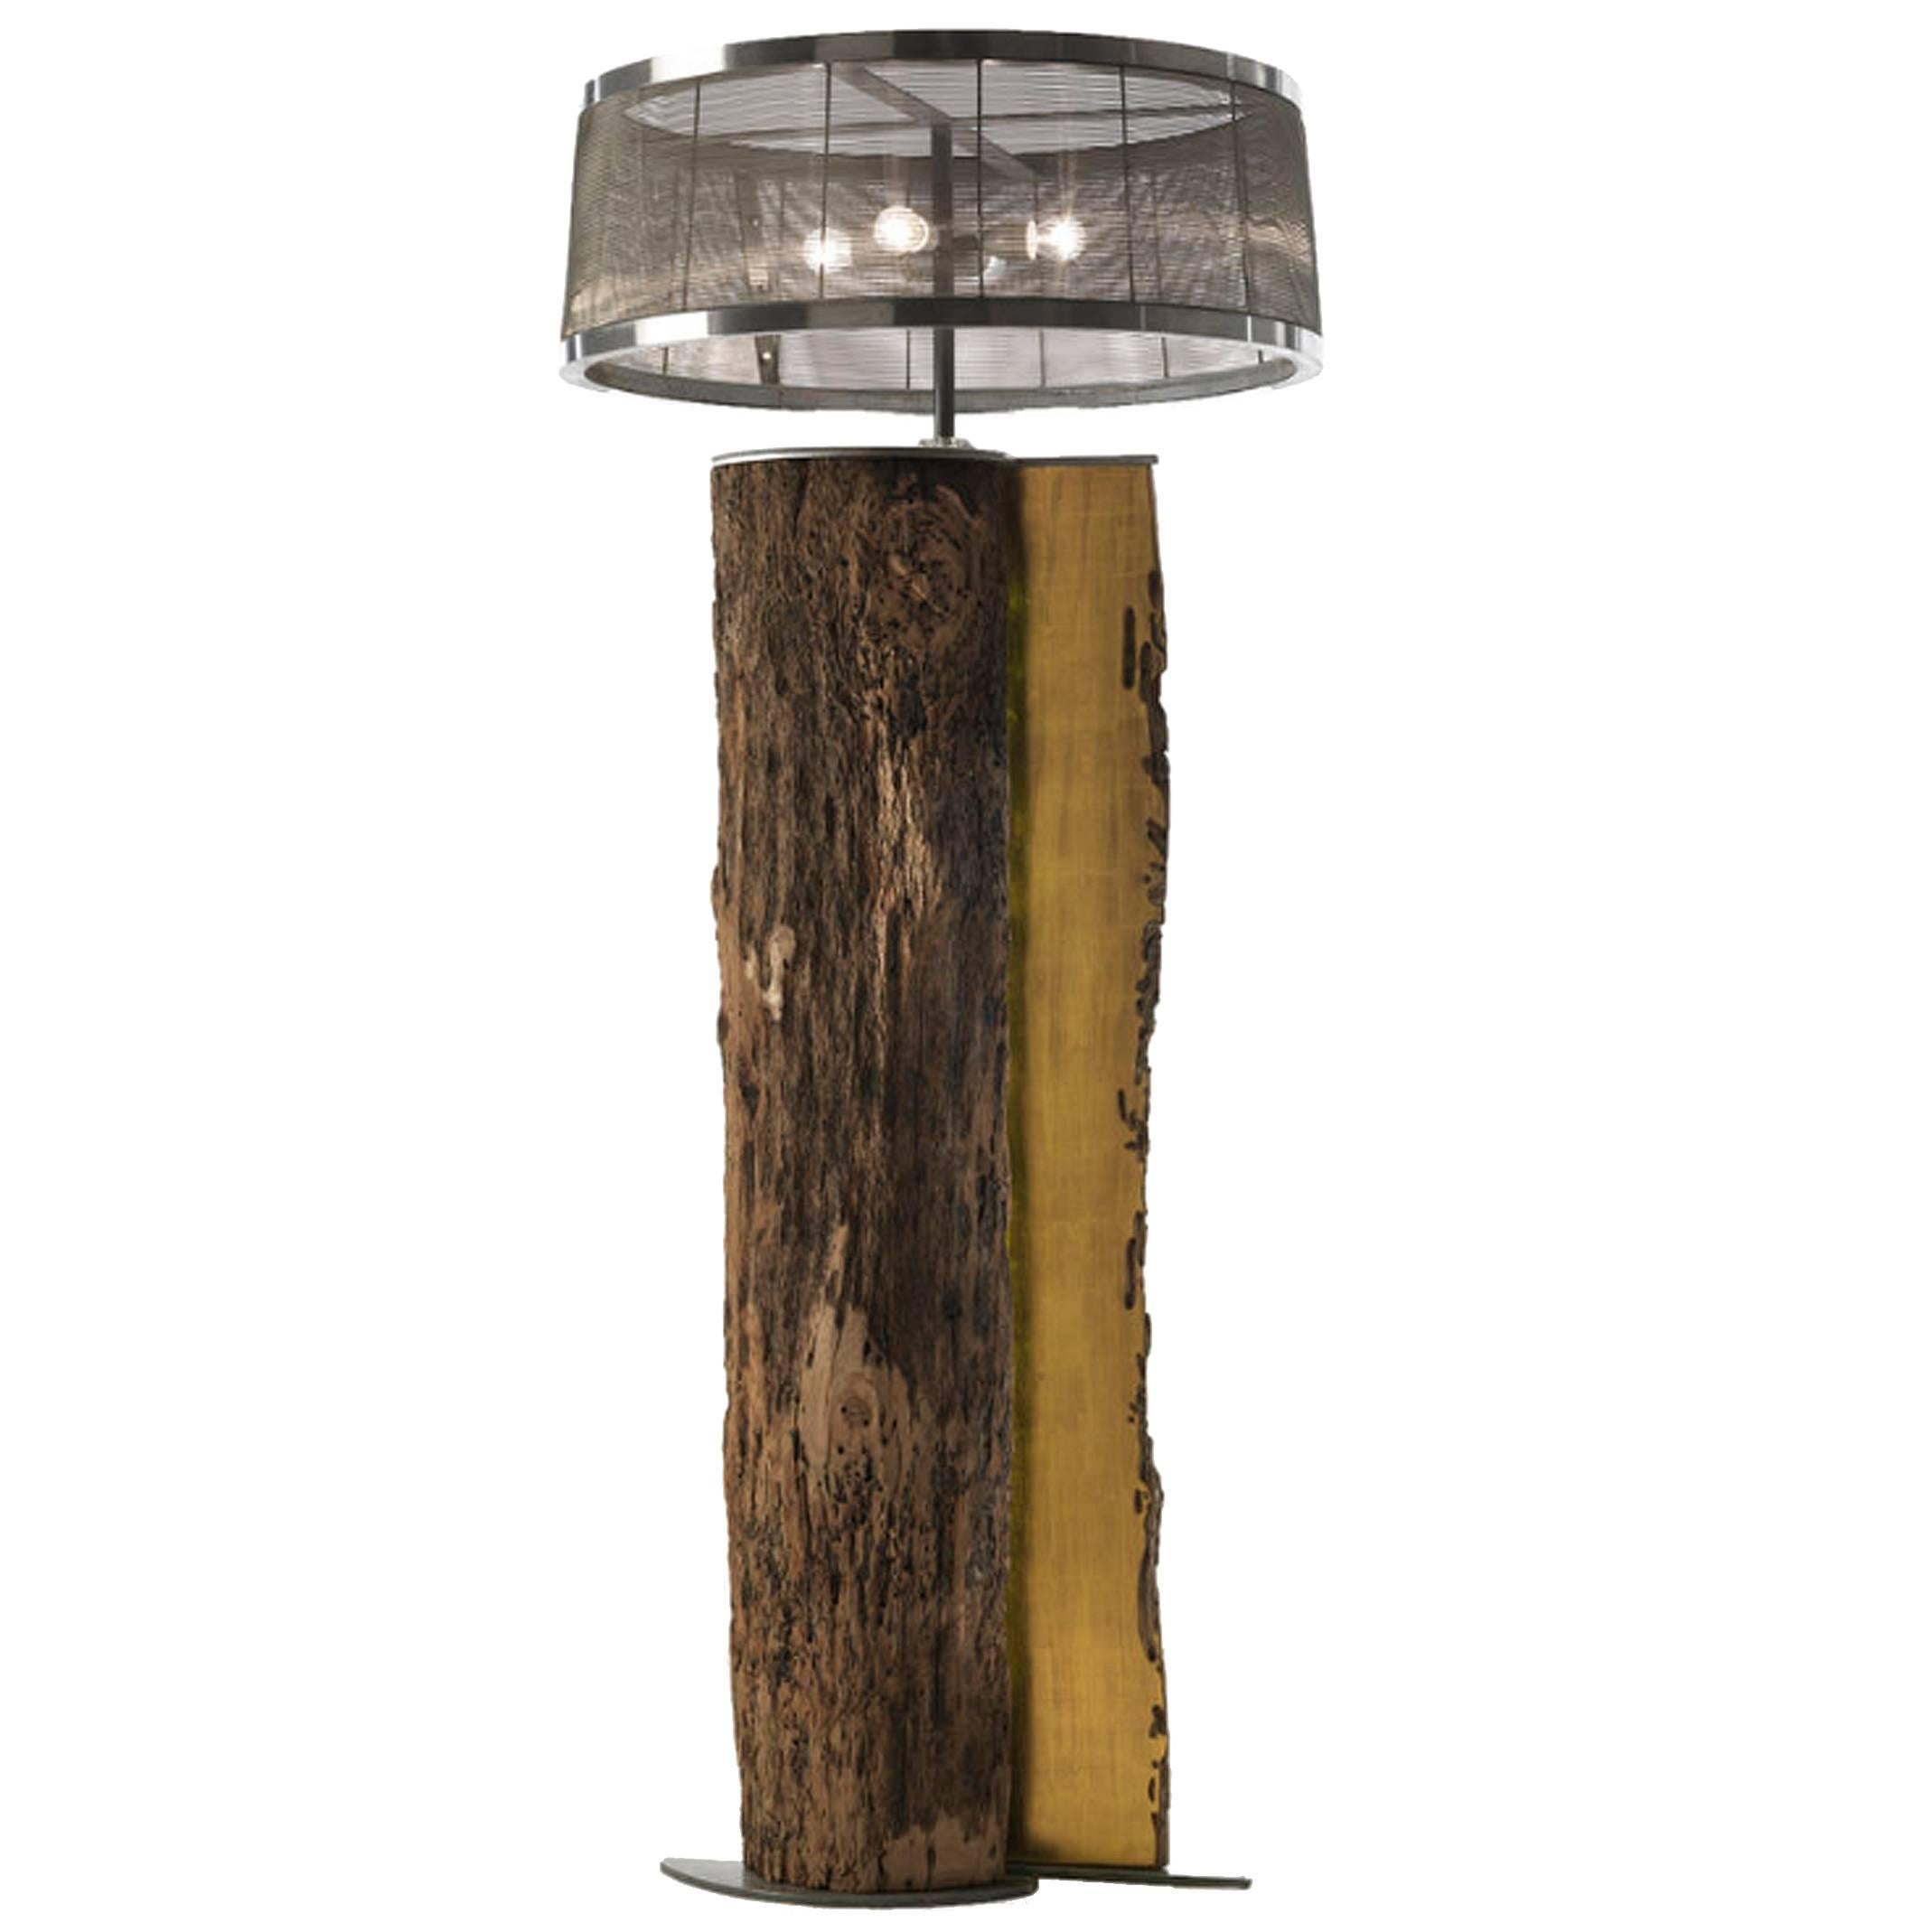 Open Oak Trunk Floor Lamp with Shards of Murano Glass